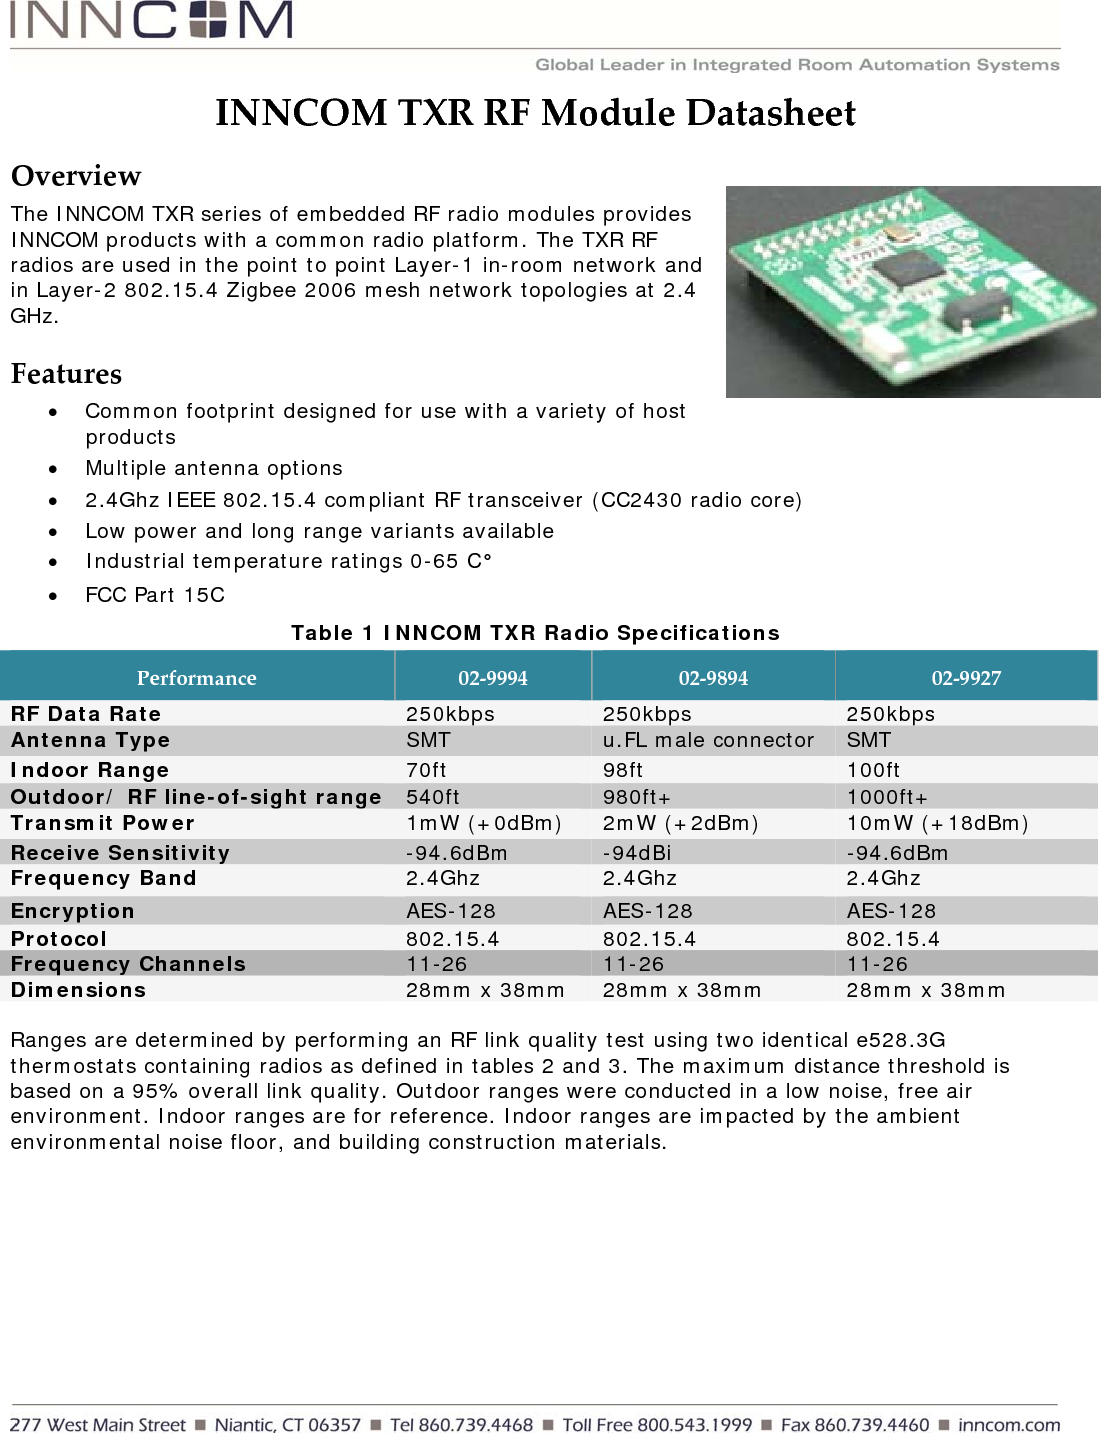     INNCOMTXRRFModuleDatasheetOverviewThe INNCOM TXR series of embedded RF radio modules provides INNCOM products with a common radio platform. The TXR RF radios are used in the point to point Layer-1 in-room network and in Layer-2 802.15.4 Zigbee 2006 mesh network topologies at 2.4 GHz.  Features• Common footprint designed for use with a variety of host products • Multiple antenna options • 2.4Ghz IEEE 802.15.4 compliant RF transceiver (CC2430 radio core) • Low power and long range variants available • Industrial temperature ratings 0-65 C° • FCC Part 15C  Table 1 INNCOM TXR Radio Specifications Performance02‐999402‐989402‐9927RF Data Rate  250kbps  250kbps  250kbps Antenna Type  SMT  u.FL male connector  SMT Indoor Range   70ft  98ft  100ft Outdoor/ RF line-of-sight range  540ft  980ft+  1000ft+ Transmit Power  1mW (+0dBm)  2mW (+2dBm)  10mW (+18dBm) Receive Sensitivity  -94.6dBm  -94dBi  -94.6dBm Frequency Band  2.4Ghz  2.4Ghz  2.4Ghz Encryption  AES-128  AES-128  AES-128 Protocol  802.15.4  802.15.4  802.15.4 Frequency Channels  11-26  11-26  11-26 Dimensions  28mm x 38mm  28mm x 38mm  28mm x 38mm  Ranges are determined by performing an RF link quality test using two identical e528.3G thermostats containing radios as defined in tables 2 and 3. The maximum distance threshold is based on a 95% overall link quality. Outdoor ranges were conducted in a low noise, free air environment. Indoor ranges are for reference. Indoor ranges are impacted by the ambient environmental noise floor, and building construction materials.  